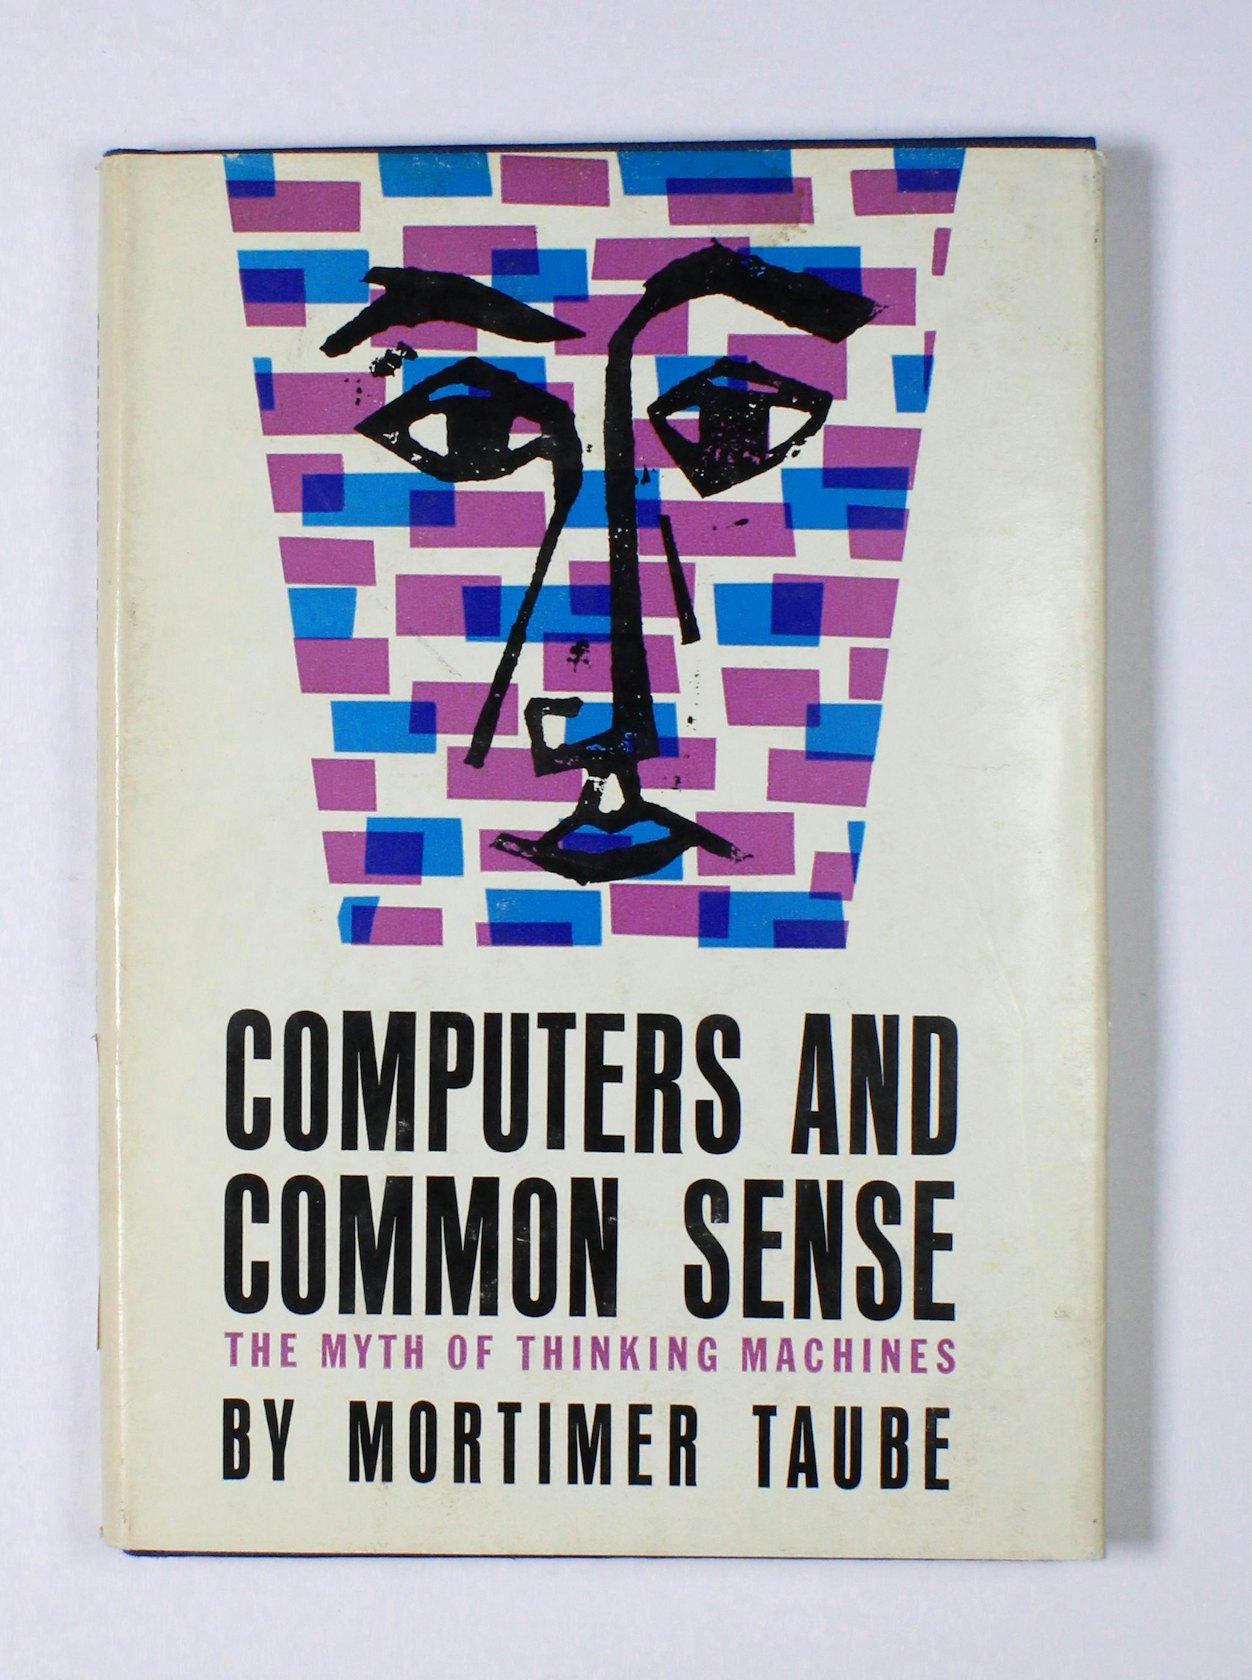 Computers and Common Sense: The Myth of Thinking Machines